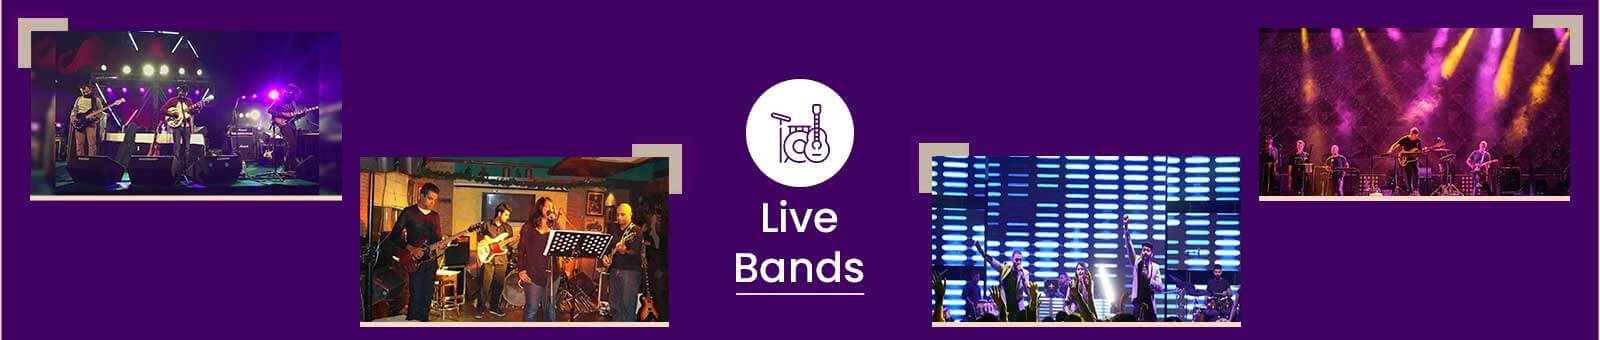 Hire Top Live Bands In Patna